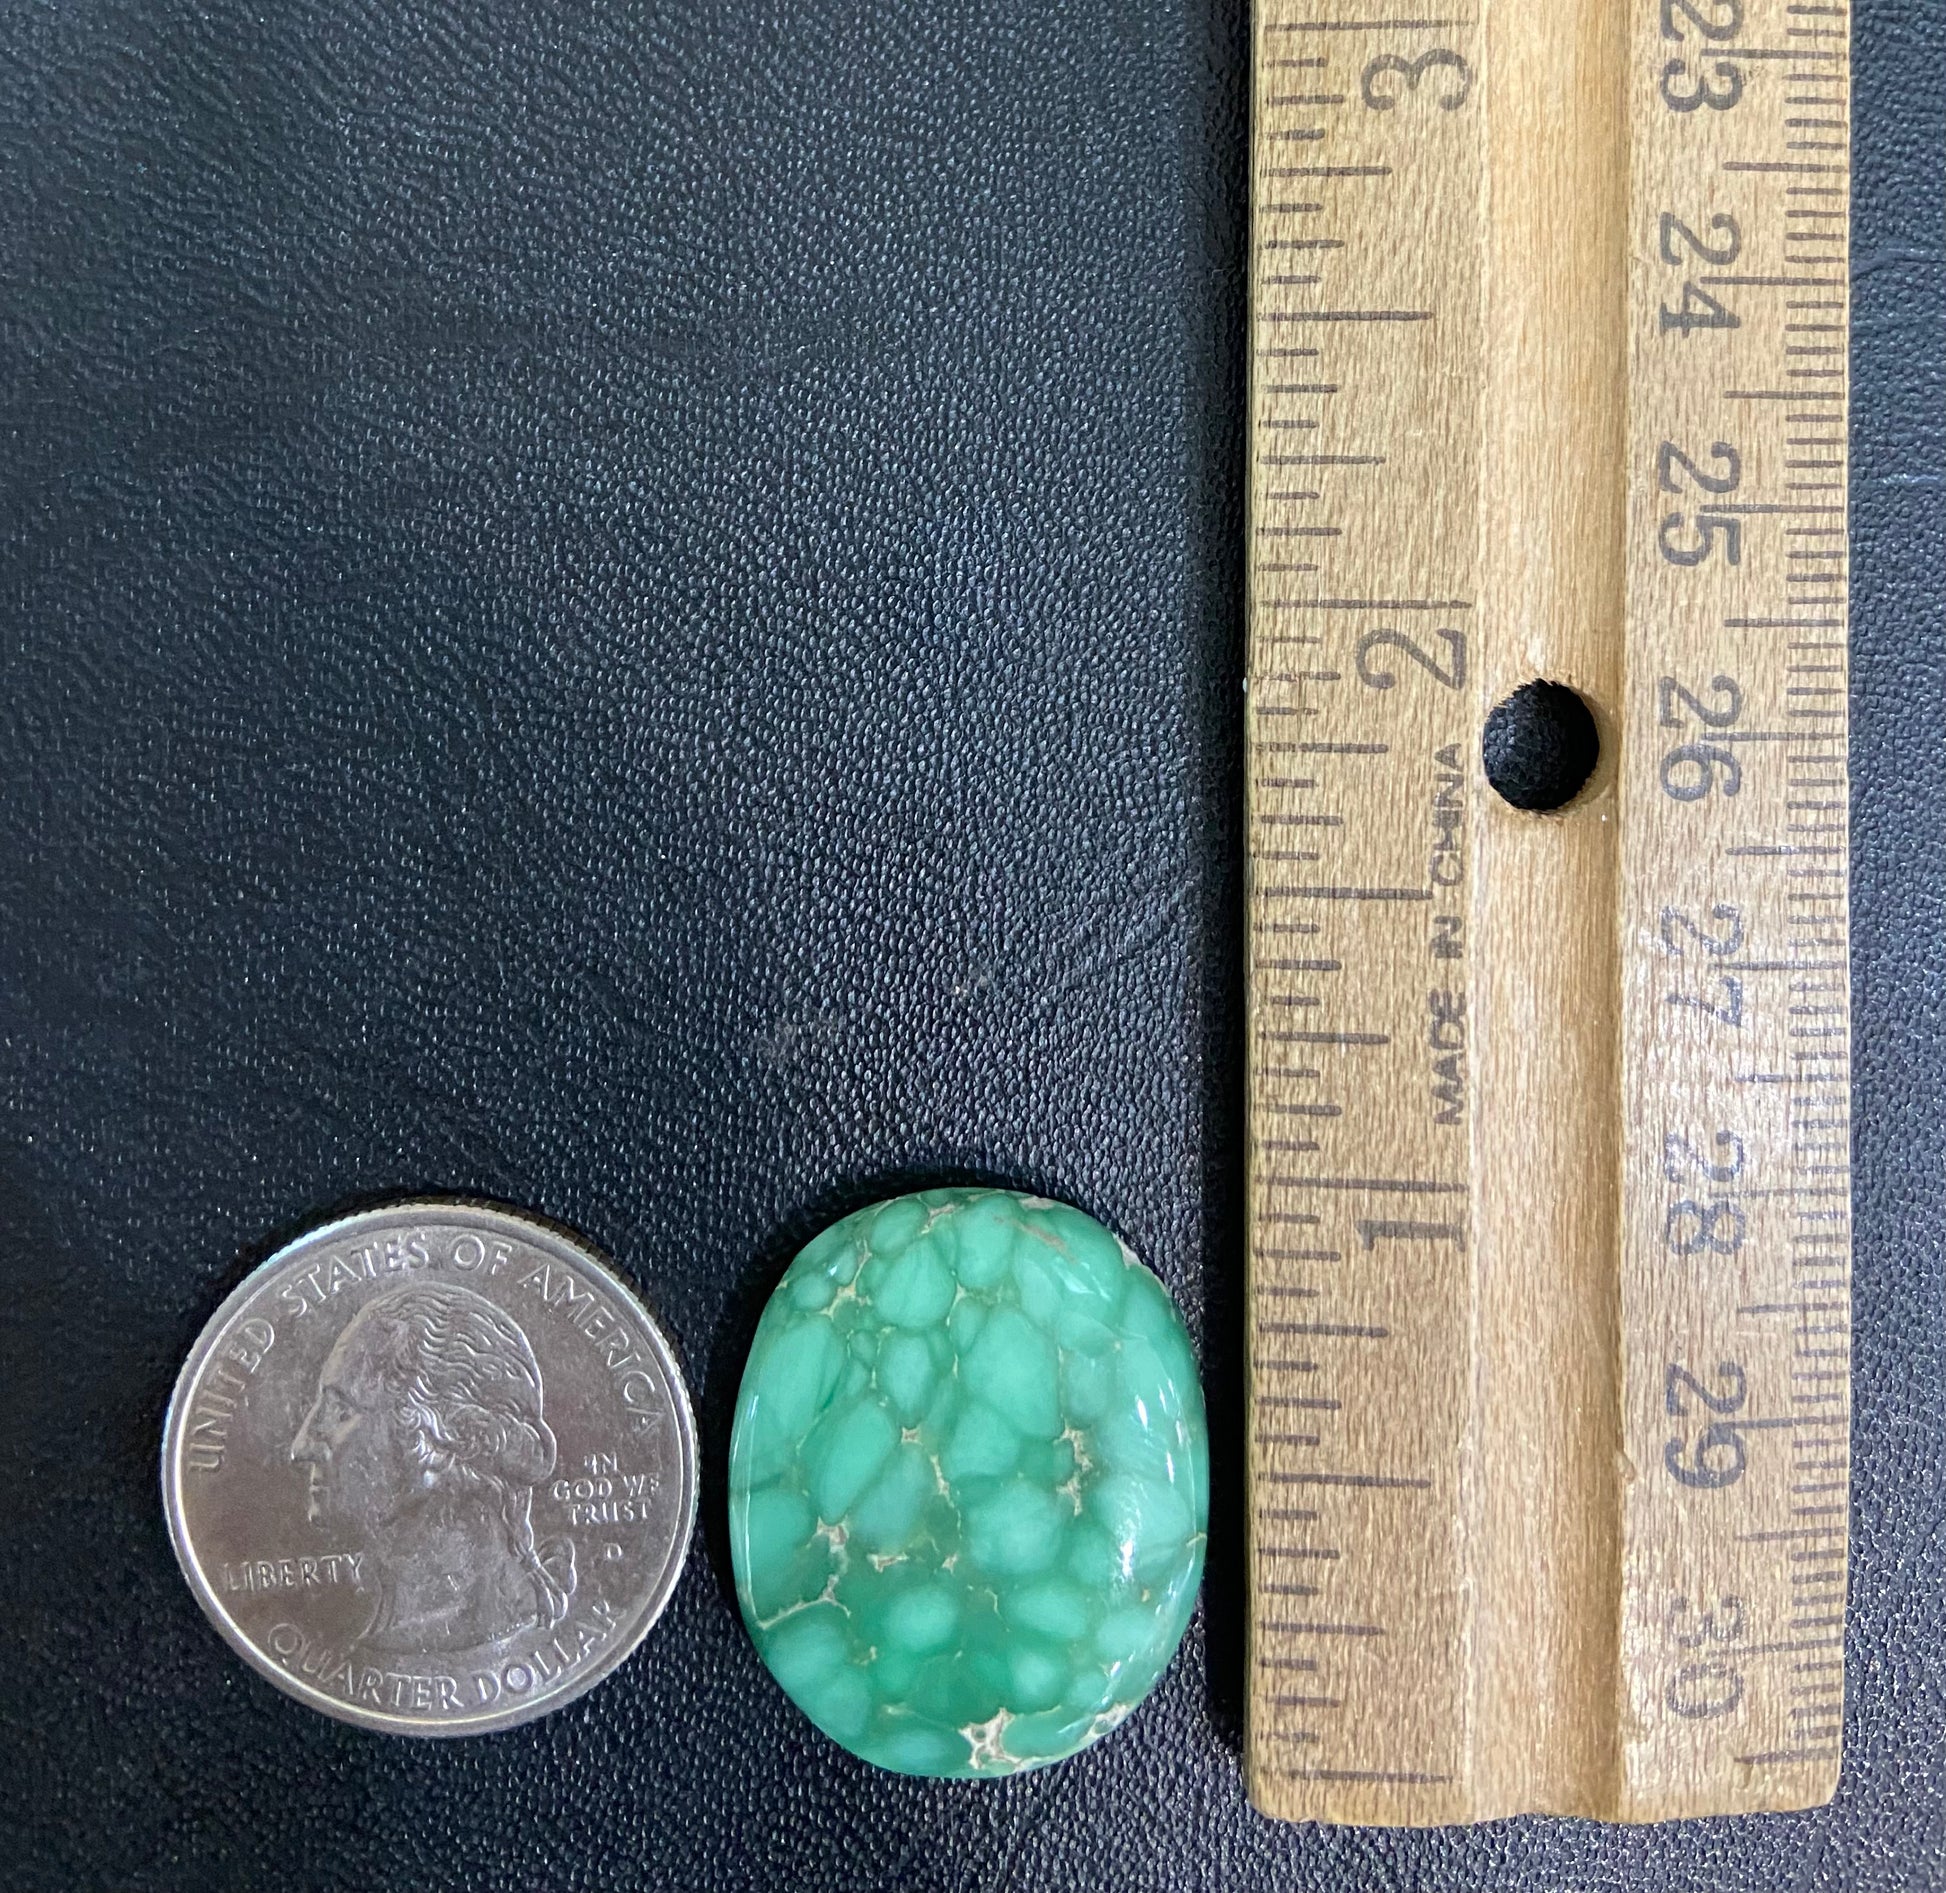 A loose, oval cabochon cut variscite stone from Utah, USA.